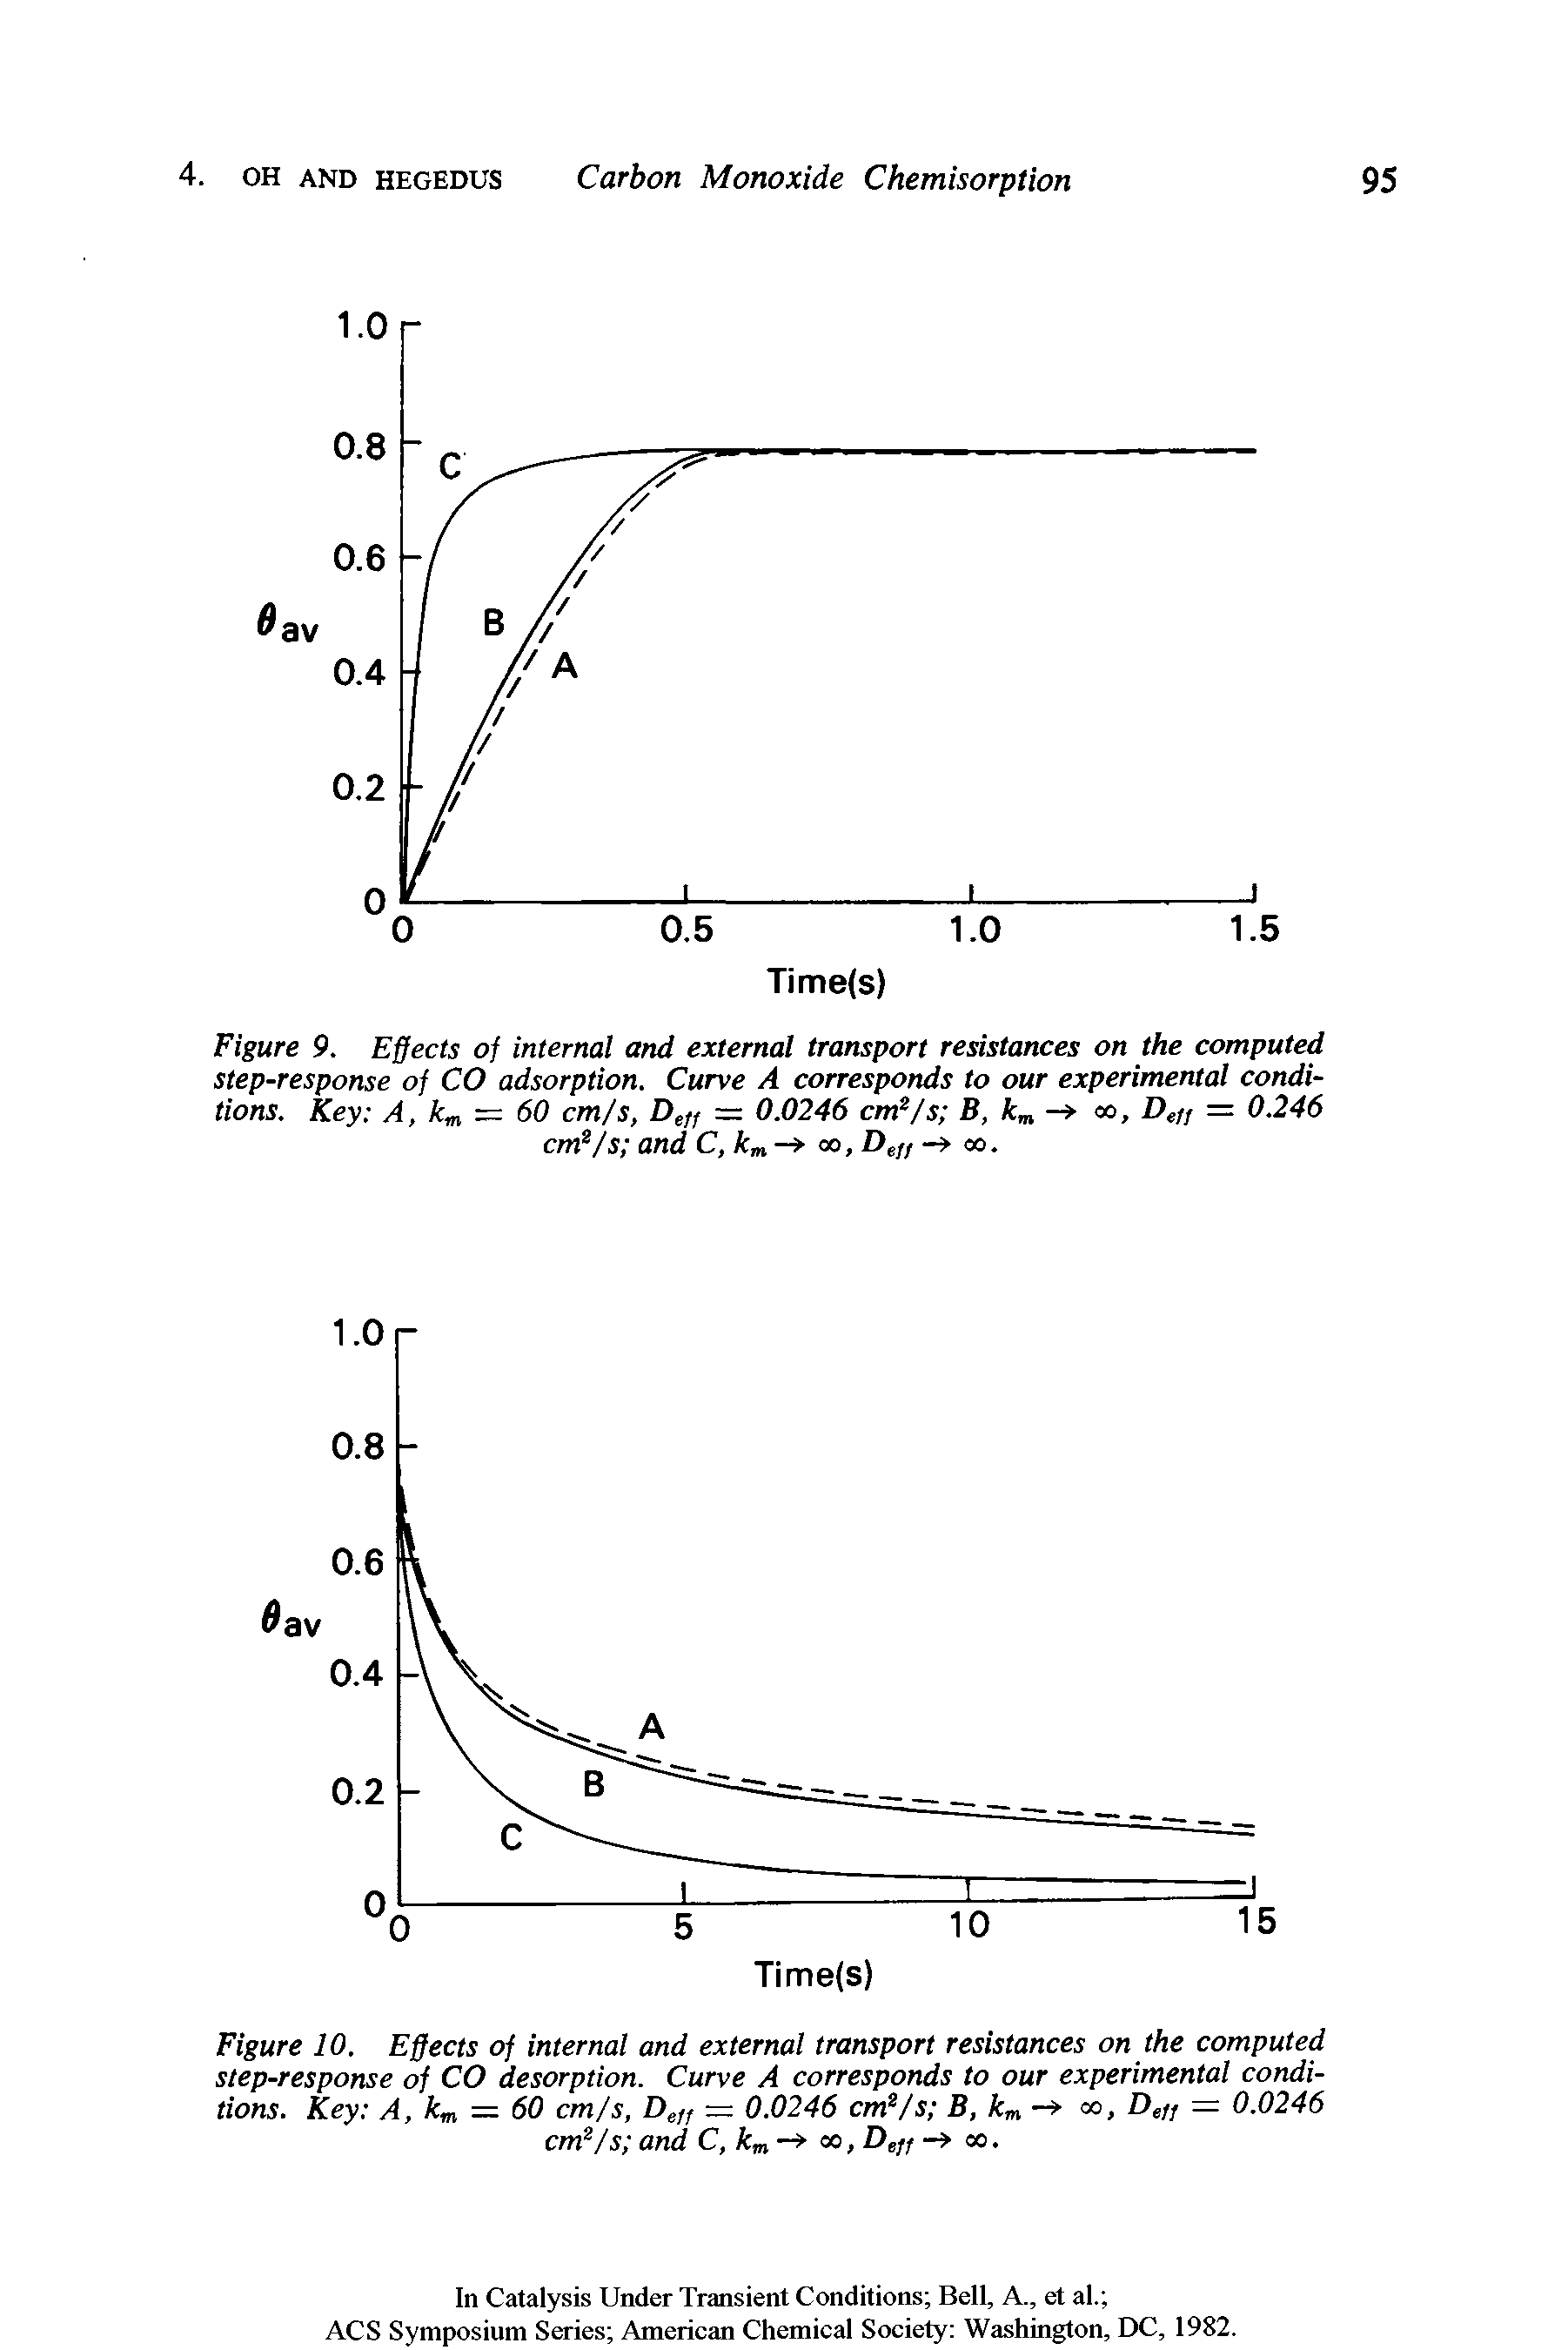 Figure 10. Effects of internal and external transport resistances on the computed step-response of CO desorption. Curve A corresponds to our experimental conditions. Key A, km — 60 cm/s, Deff = 0.0246 cms/s B, km —r oo, Def, = 0.0246 cm2/s and C,km- oo, Delt oo.